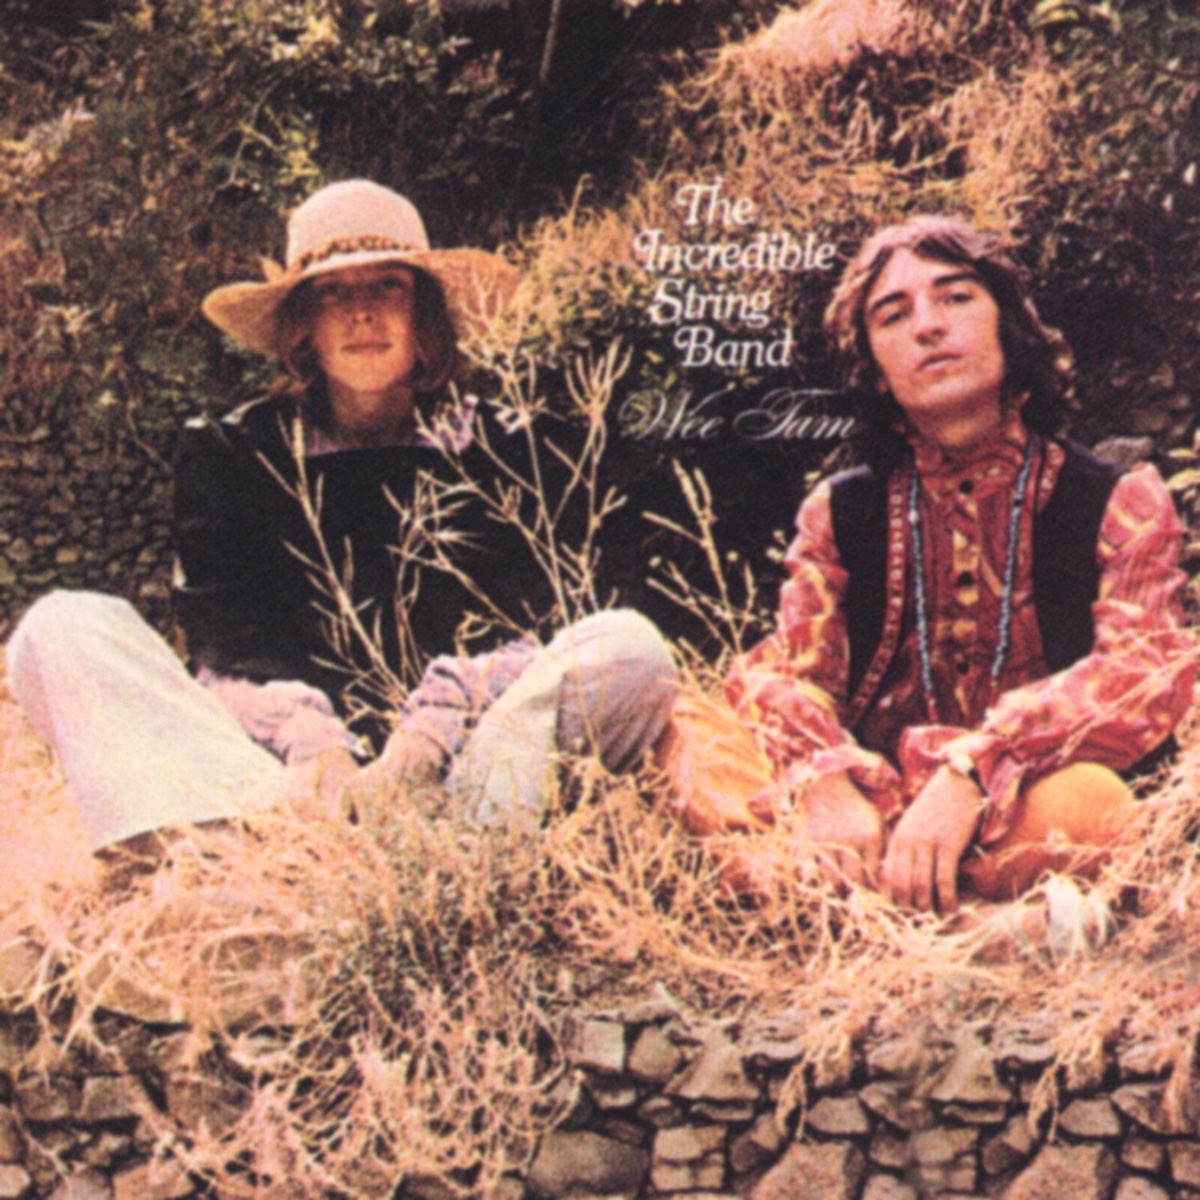 Wee Tam - Album by The Incredible String Band - Apple Music